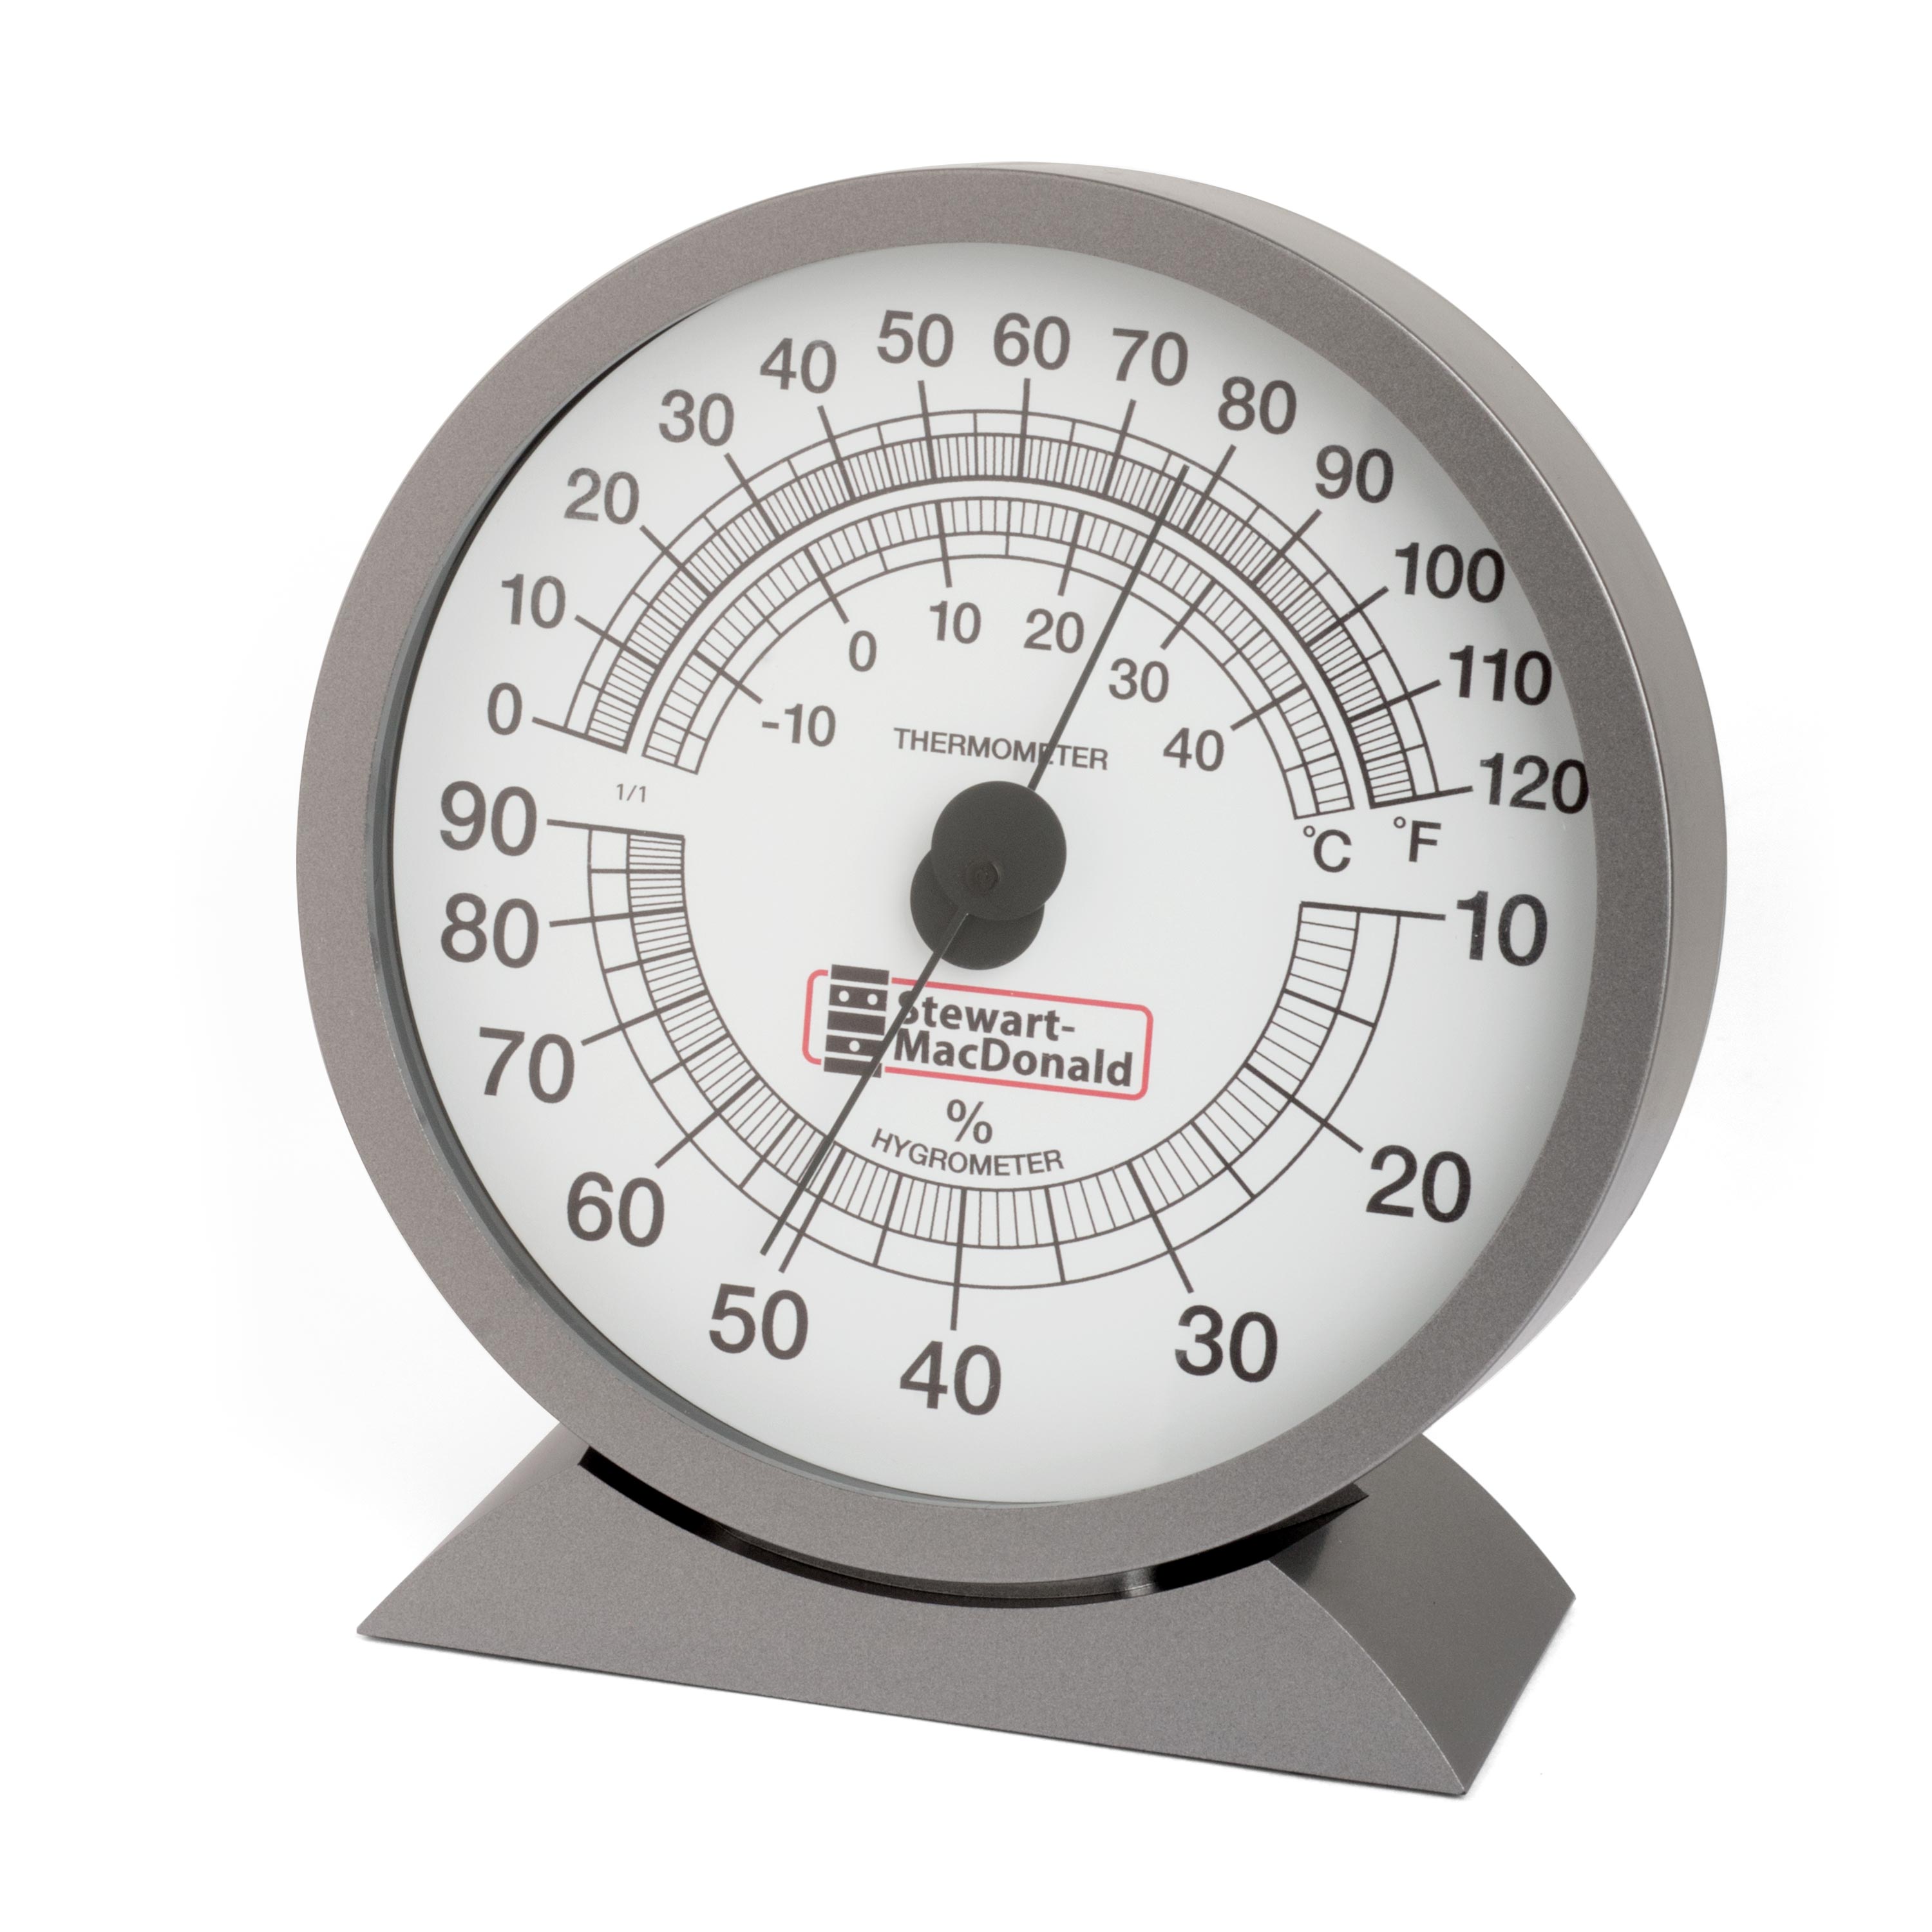 https://www.stewmac.com/globalassets/stewmax/monthly-exclusives/hygrometer-thermometer.jpg?hash=638339339580000000